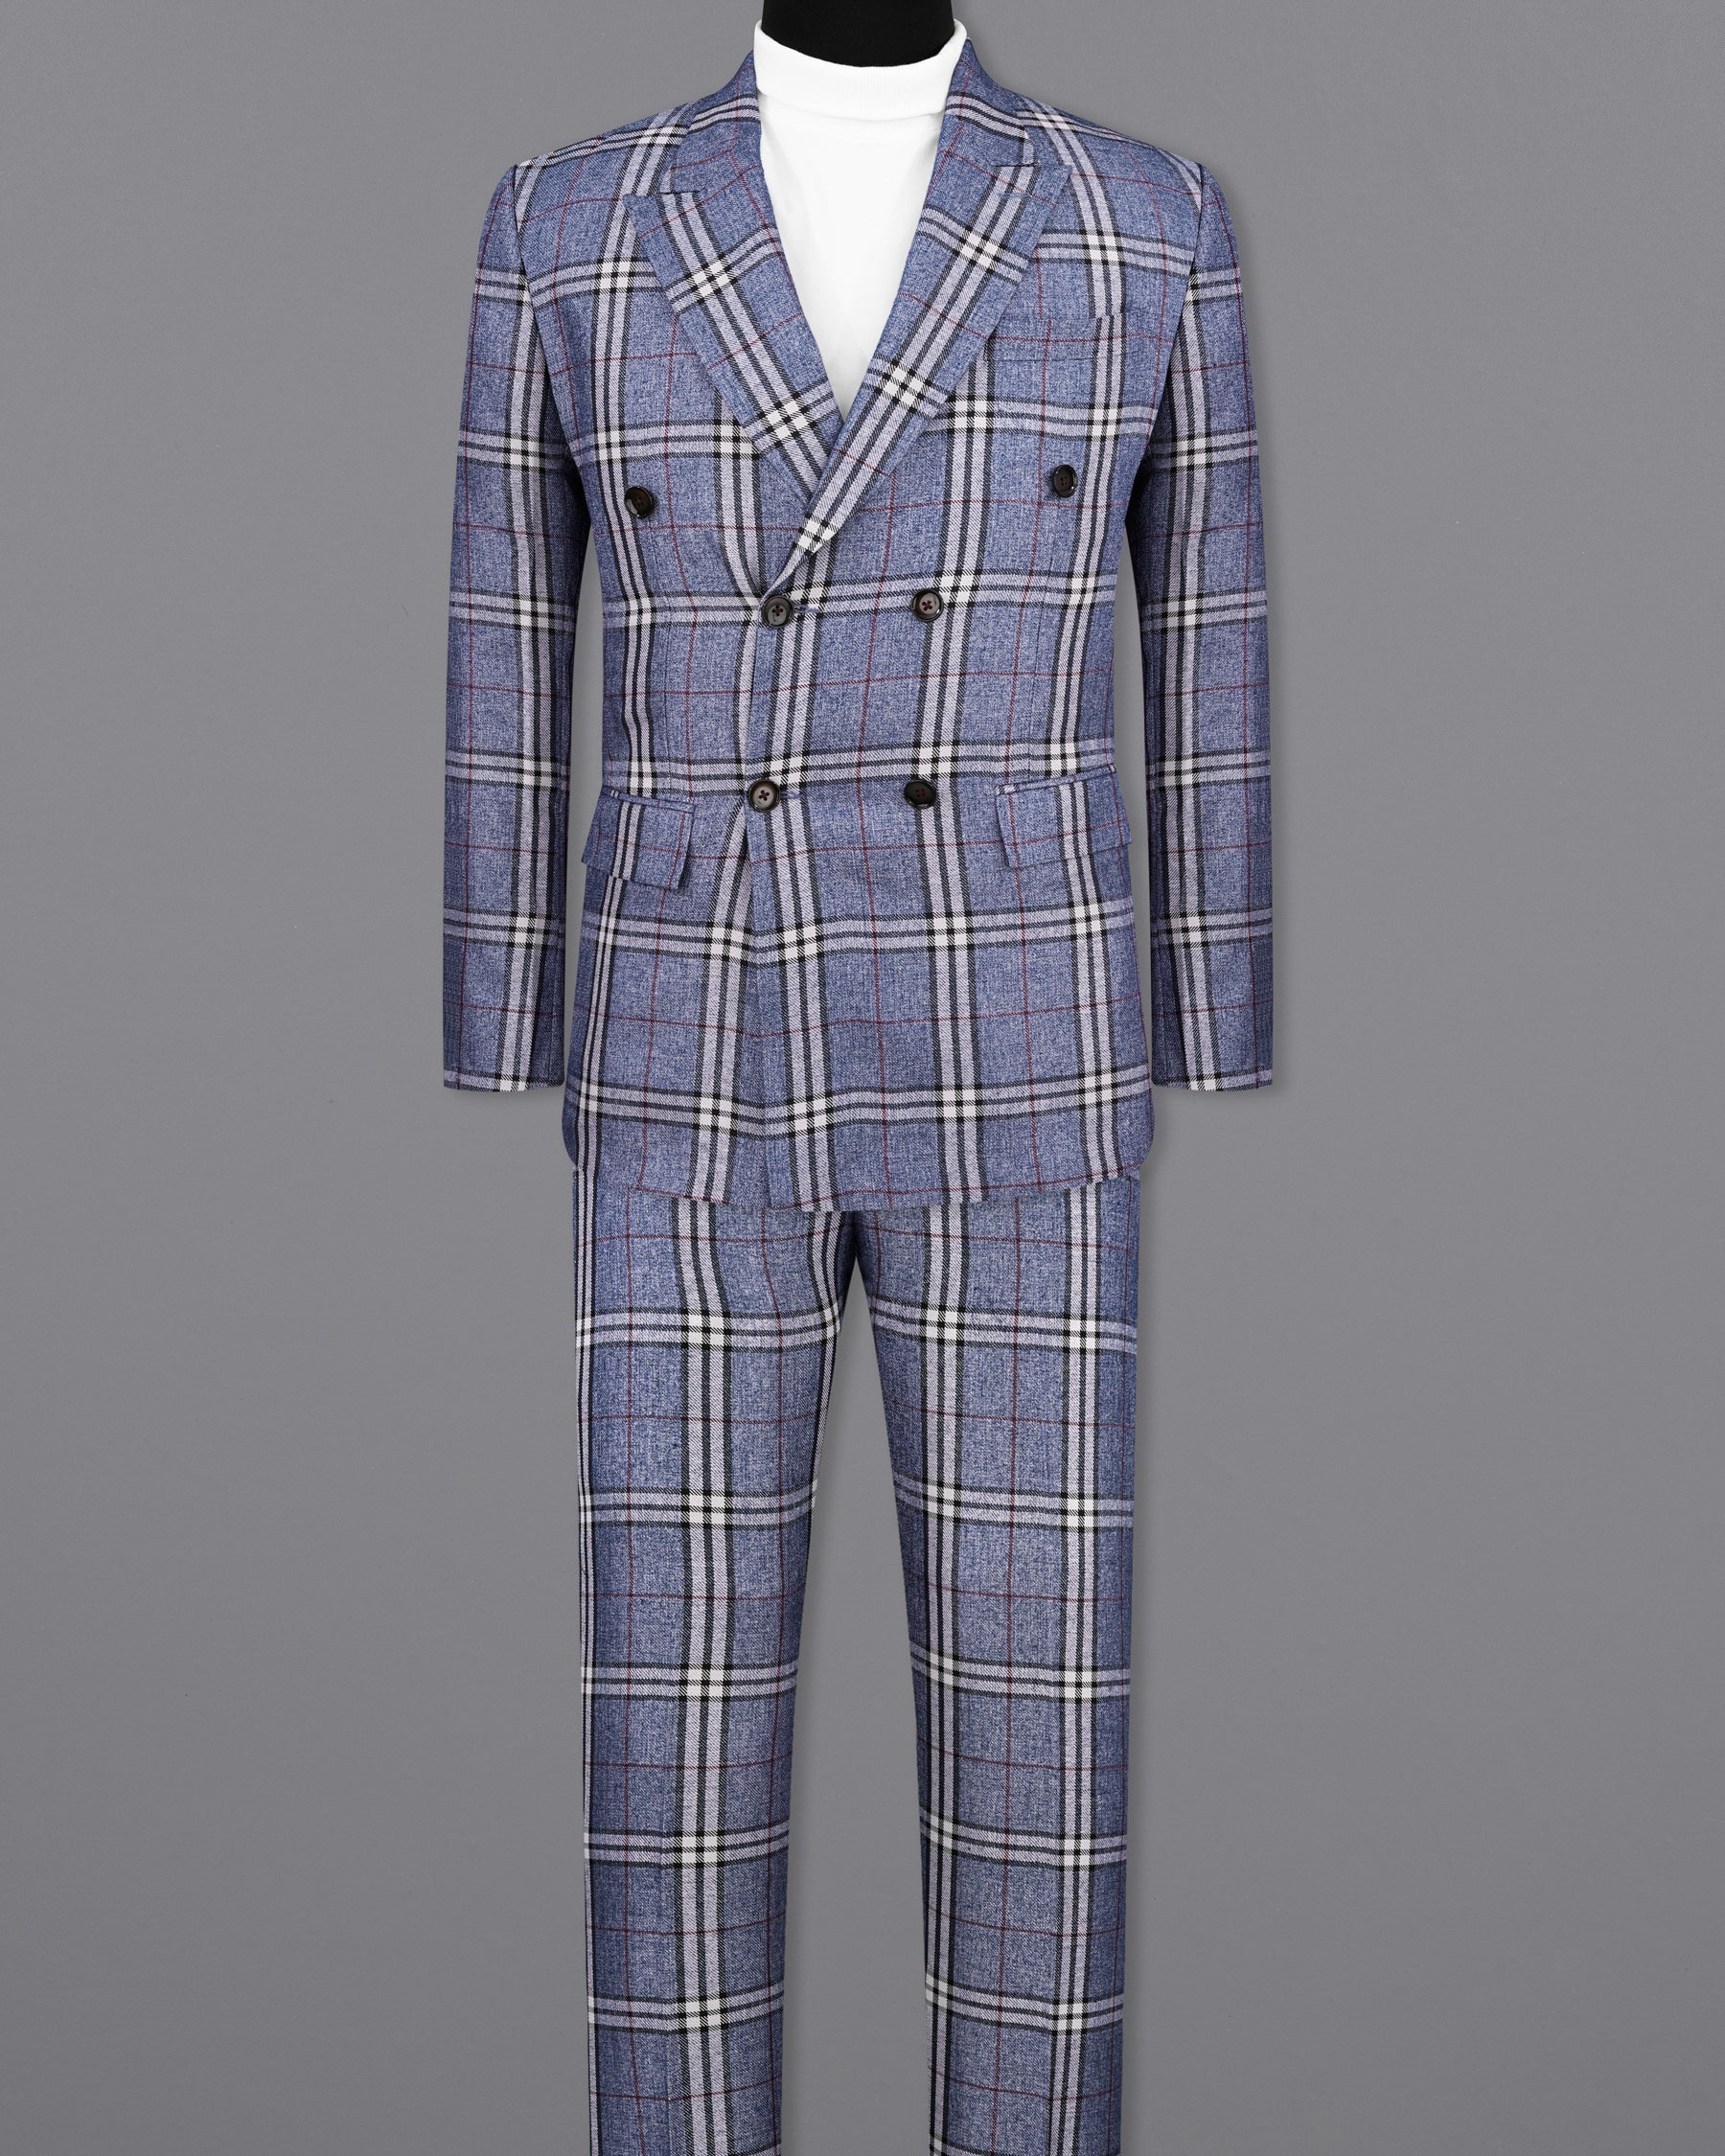 Fiord Blue Plaid Double Breasted Suit  ST2154-DB-36, ST2154-DB-38, ST2154-DB-40, ST2154-DB-42, ST2154-DB-44, ST2154-DB-46, ST2154-DB-48, ST2154-DB-50, ST2154-DB-52, ST2154-DB-54, ST2154-DB-56, ST2154-DB-58, ST2154-DB-60